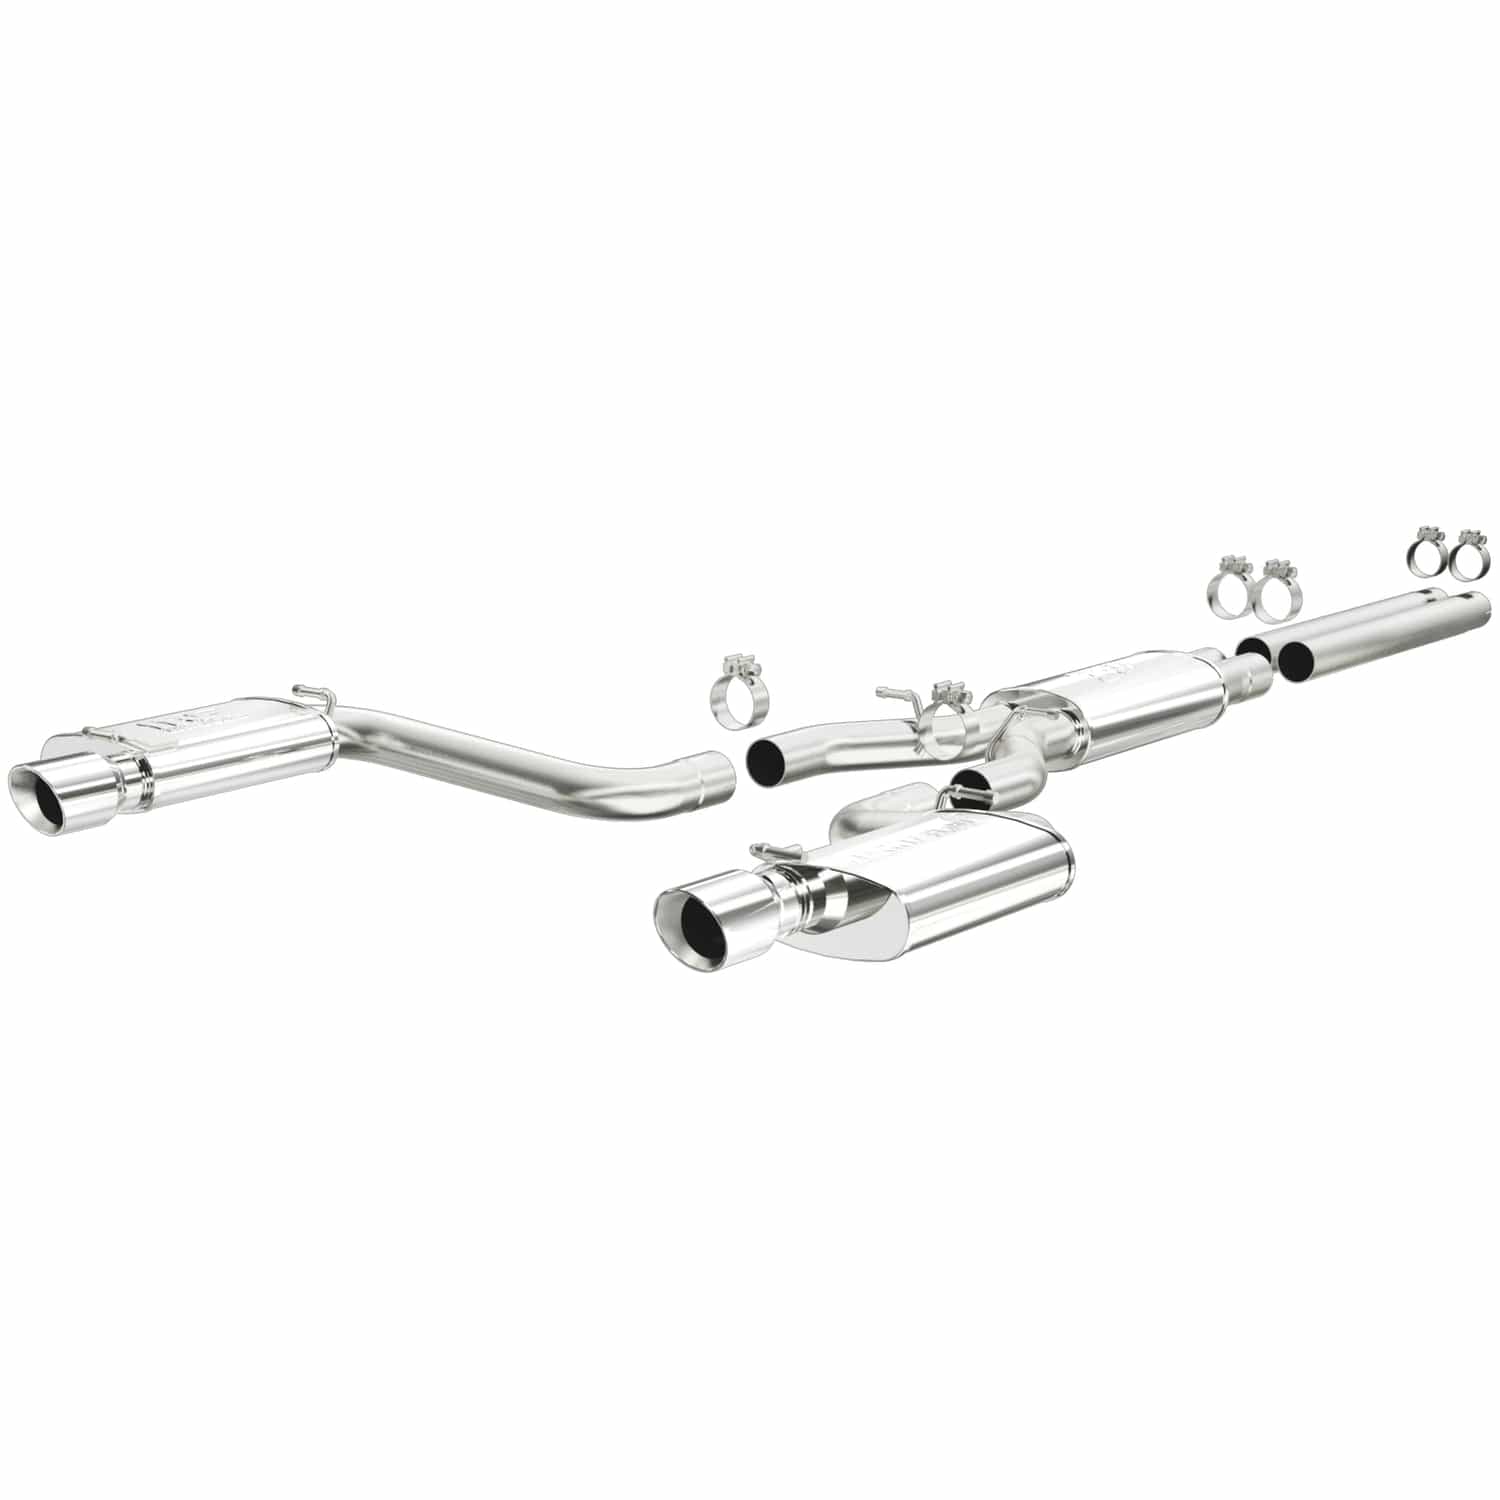 MagnaFlow Street Series Cat-Back Performance Exhaust System 16642